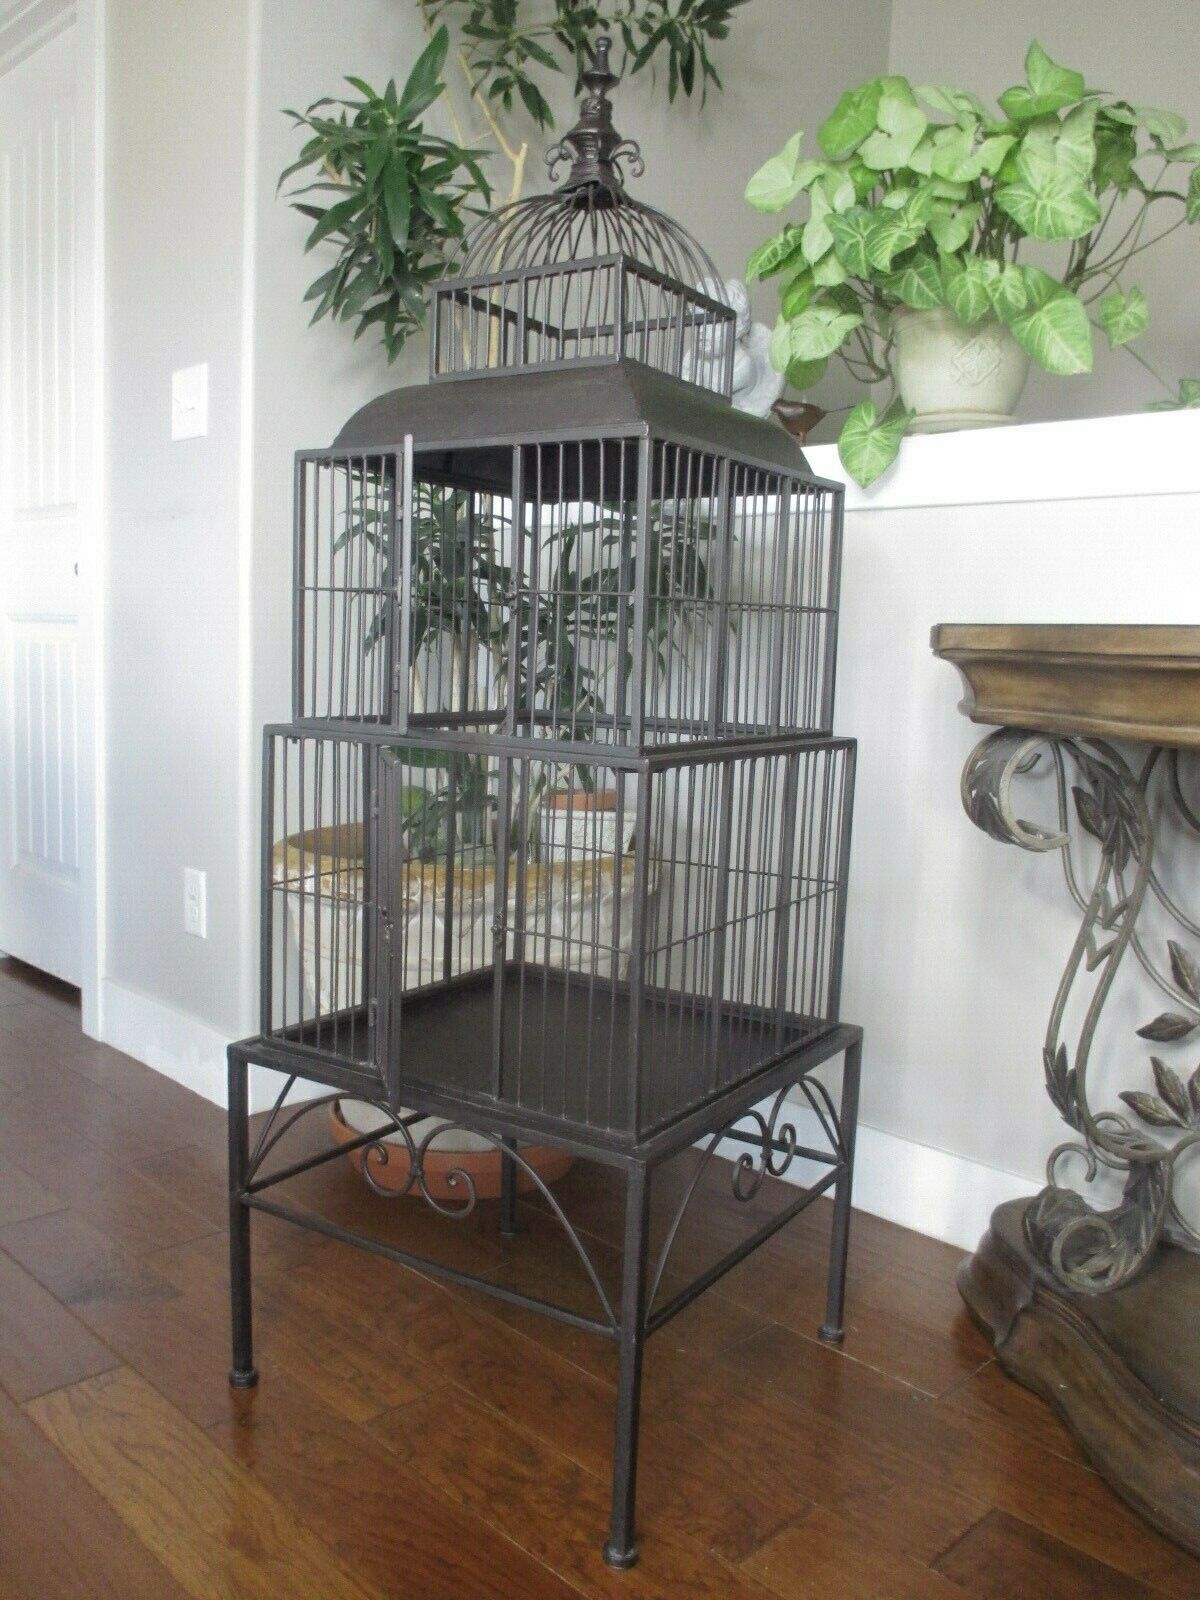 Large Iron Bird Cage Vtg Ornamental Dome Top Architectural Pyramid Stack on Base